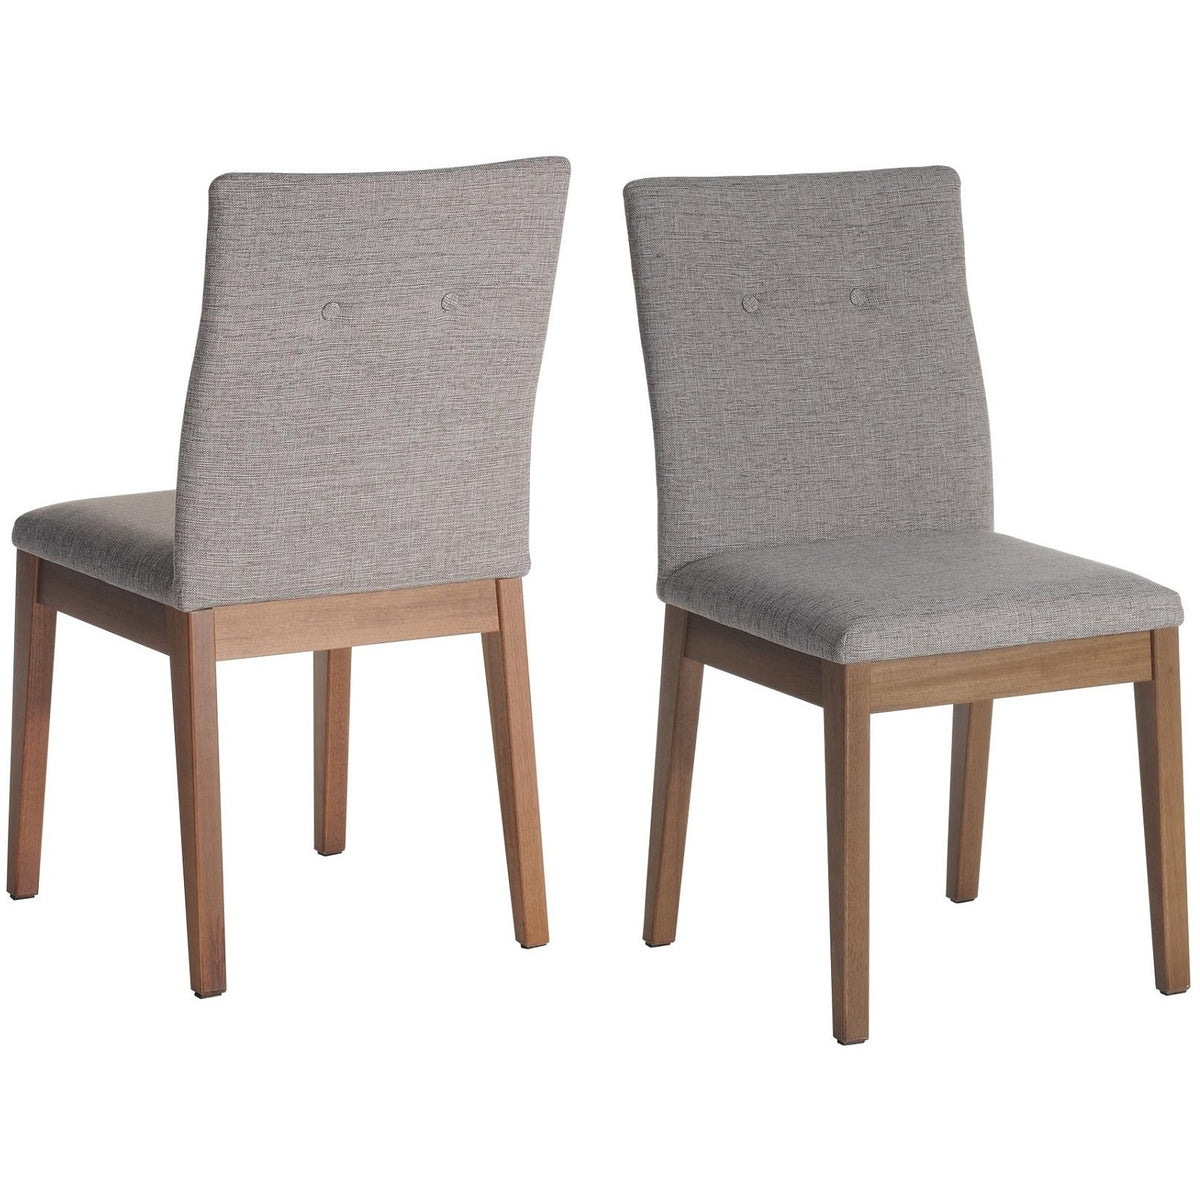 Manhattan Comfort Leroy 2-Piece Dining Chair with Stitched Buttons in Grey-Minimal & Modern